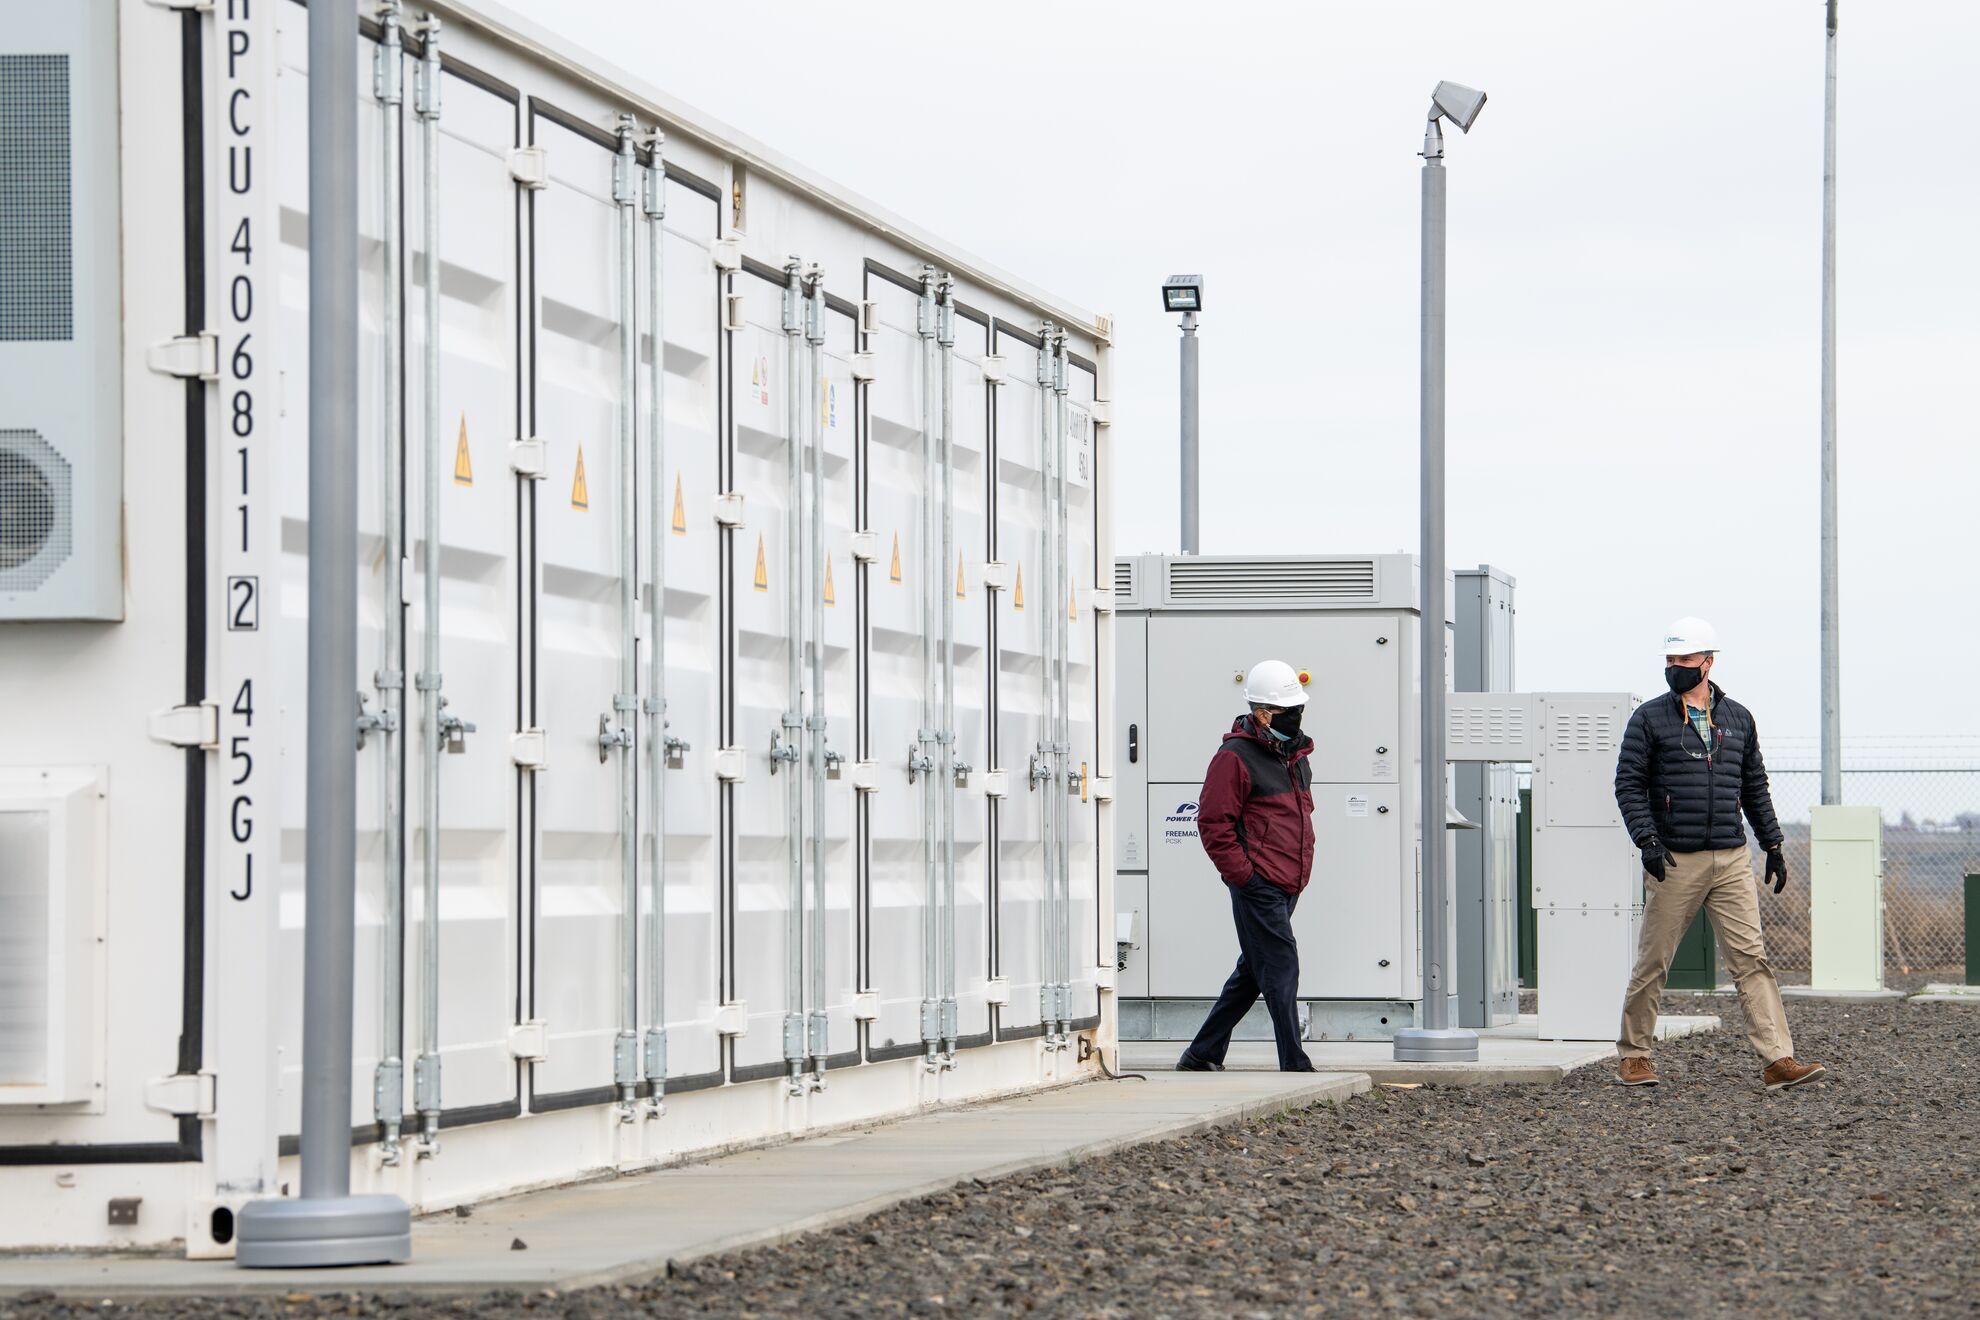 Energy storage system deployed at Horn Rapids